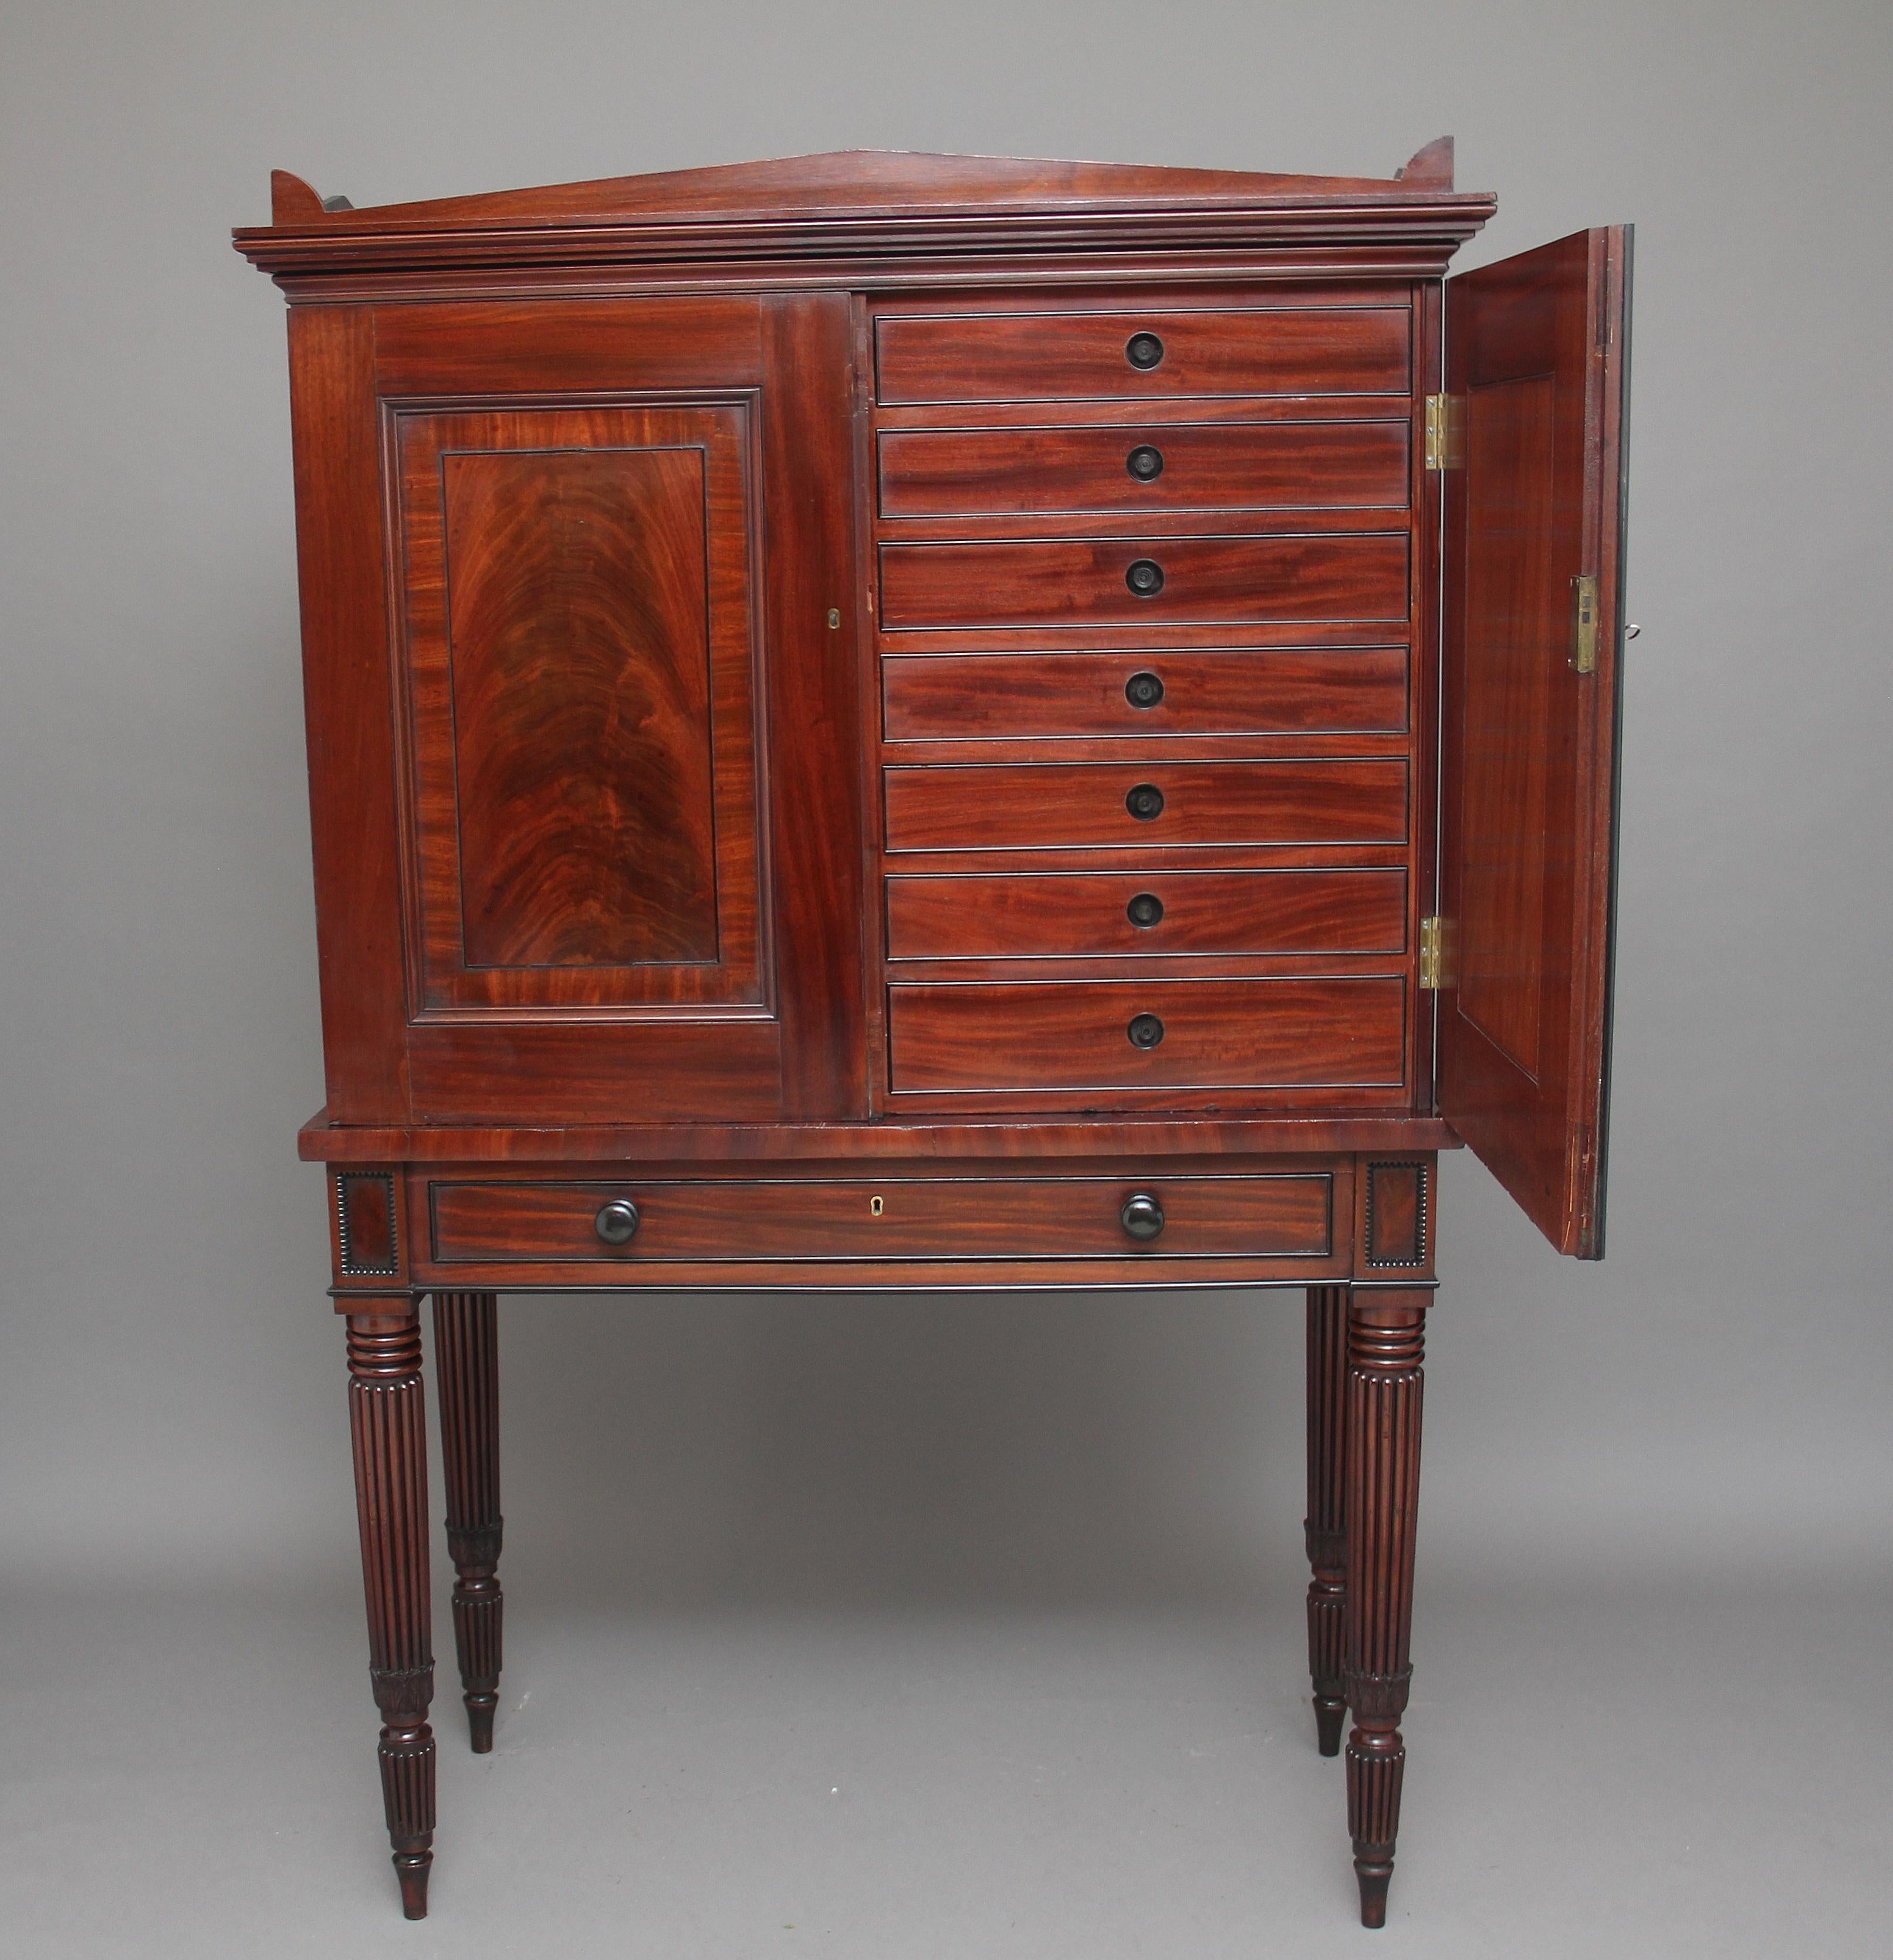 A stunning quality 19th century mahogany collectors cabinet very much in the manner and style of Gillows, the two door top enclosing fourteen oak lined drawers with ebony cock beading and sunken ebony handles, the doors have got curl veneer and